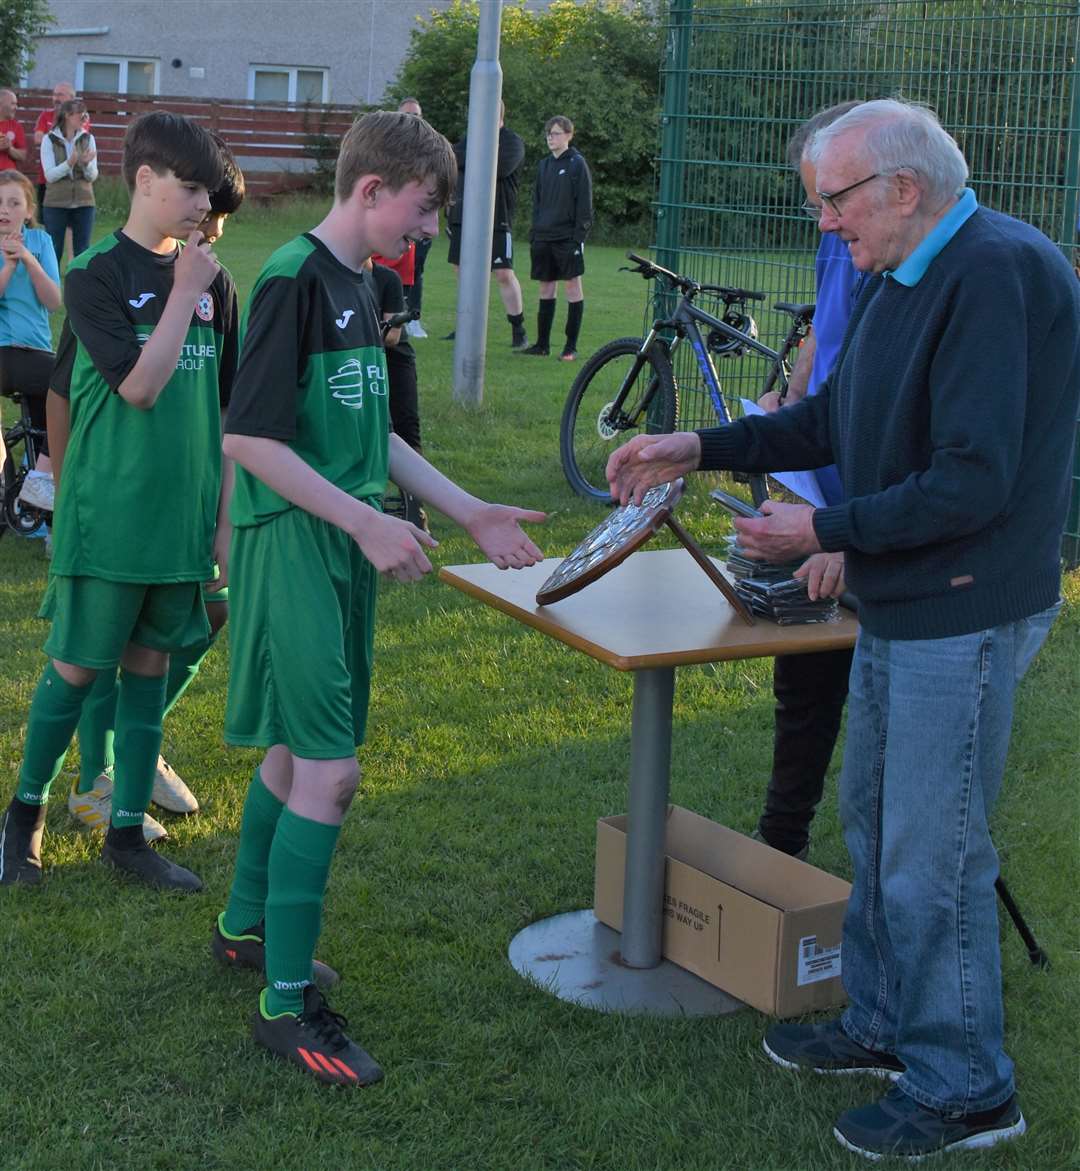 Jackie Sutherland has given decades of support to developing local footballing talent.